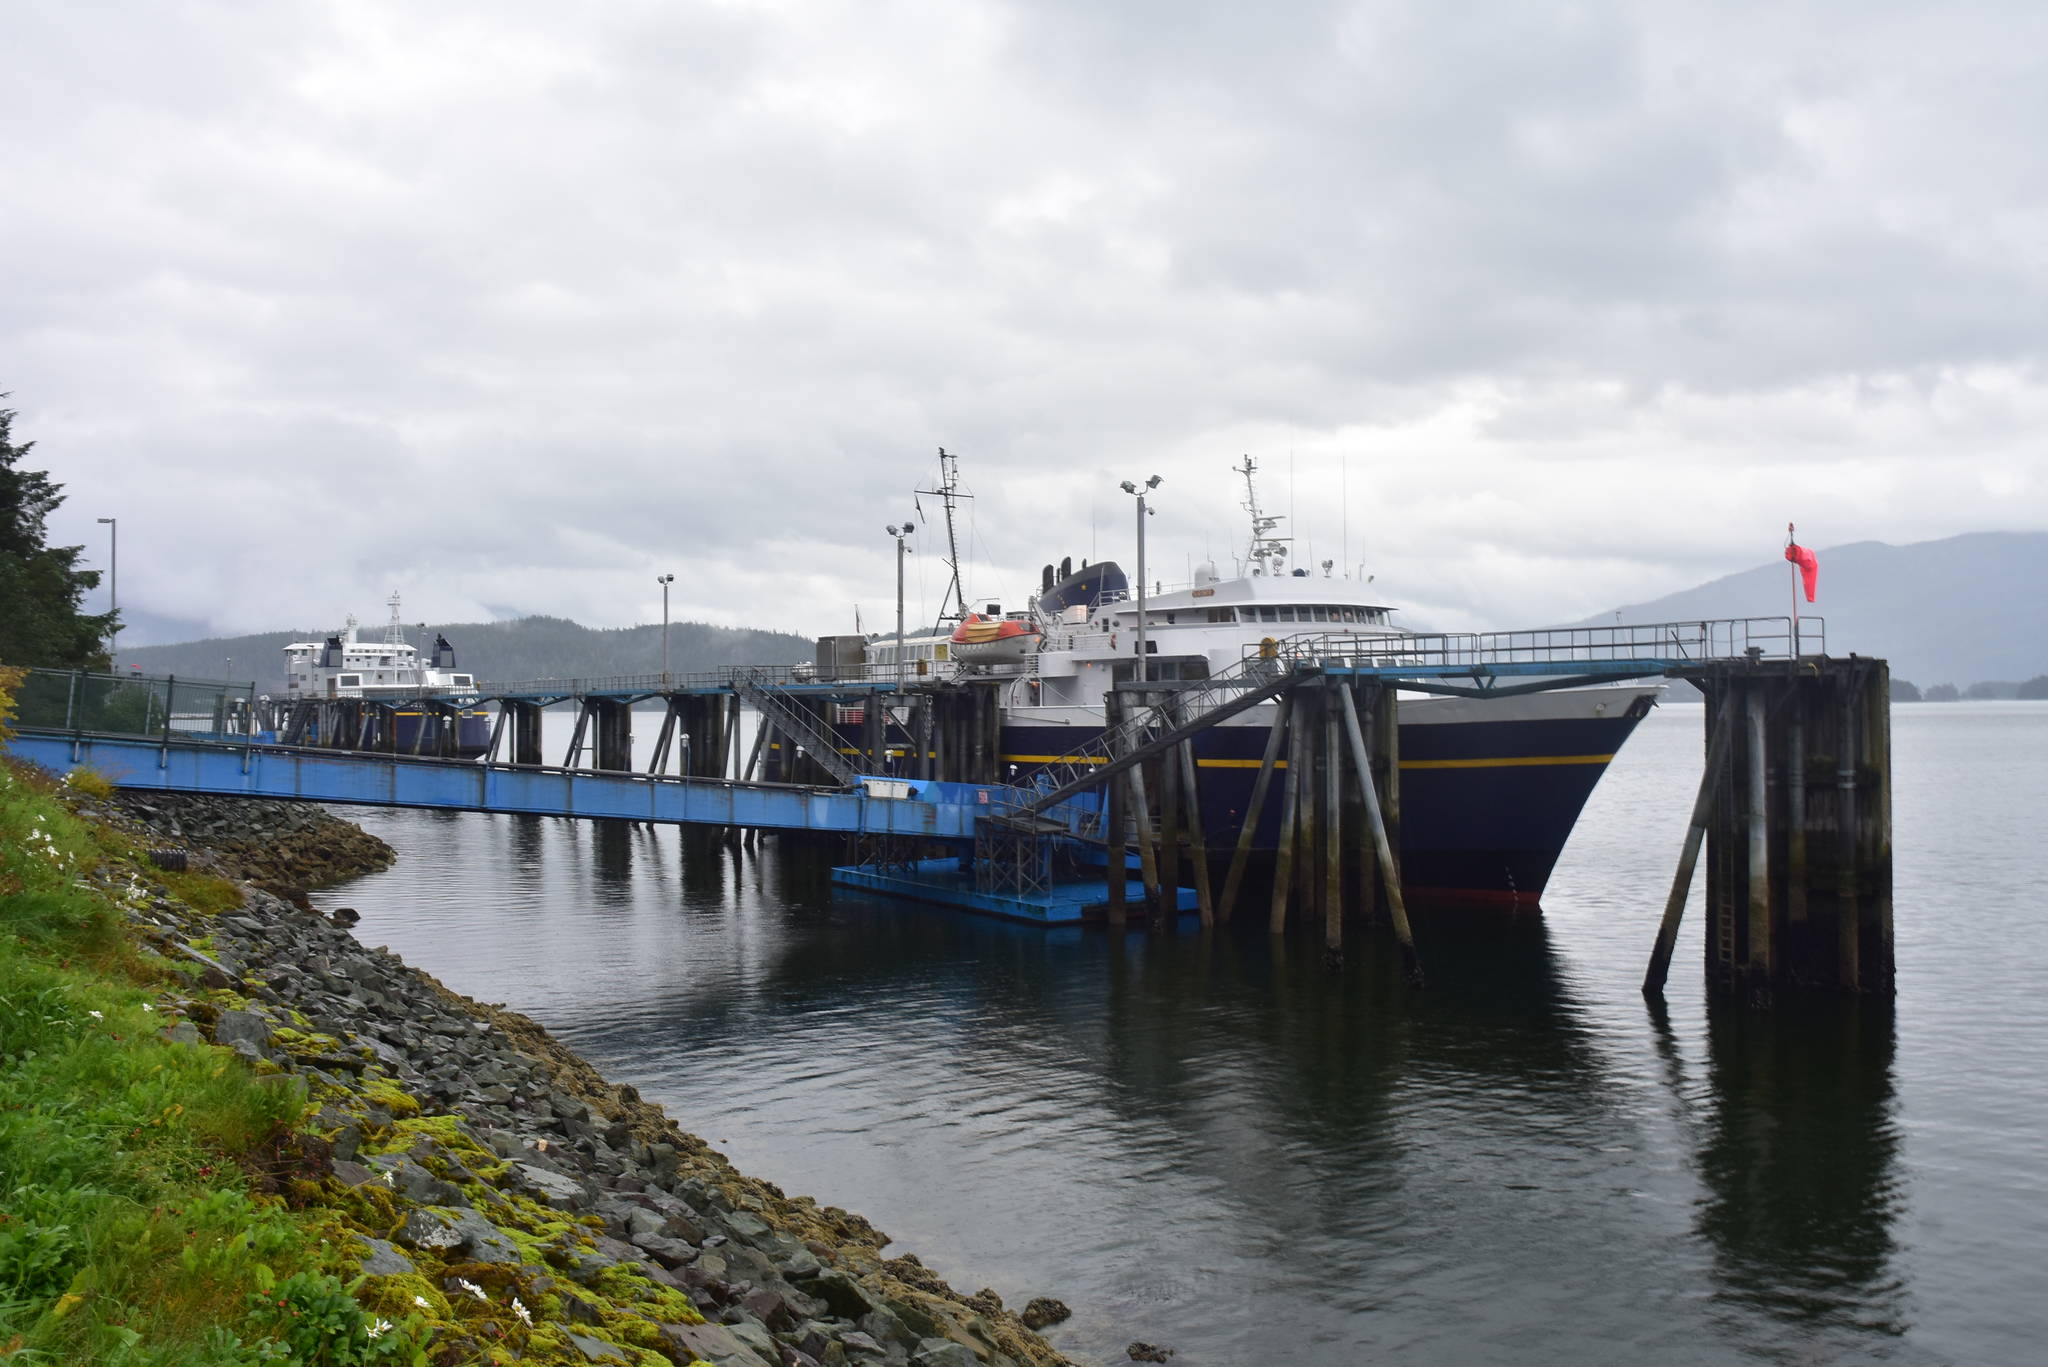 MV LeConte docks at the Auke Bay Ferry Terminal with the MV Tazlina in the background on Monday, Aug. 10, 2020. (Peter Segall / Juneau Empire File)